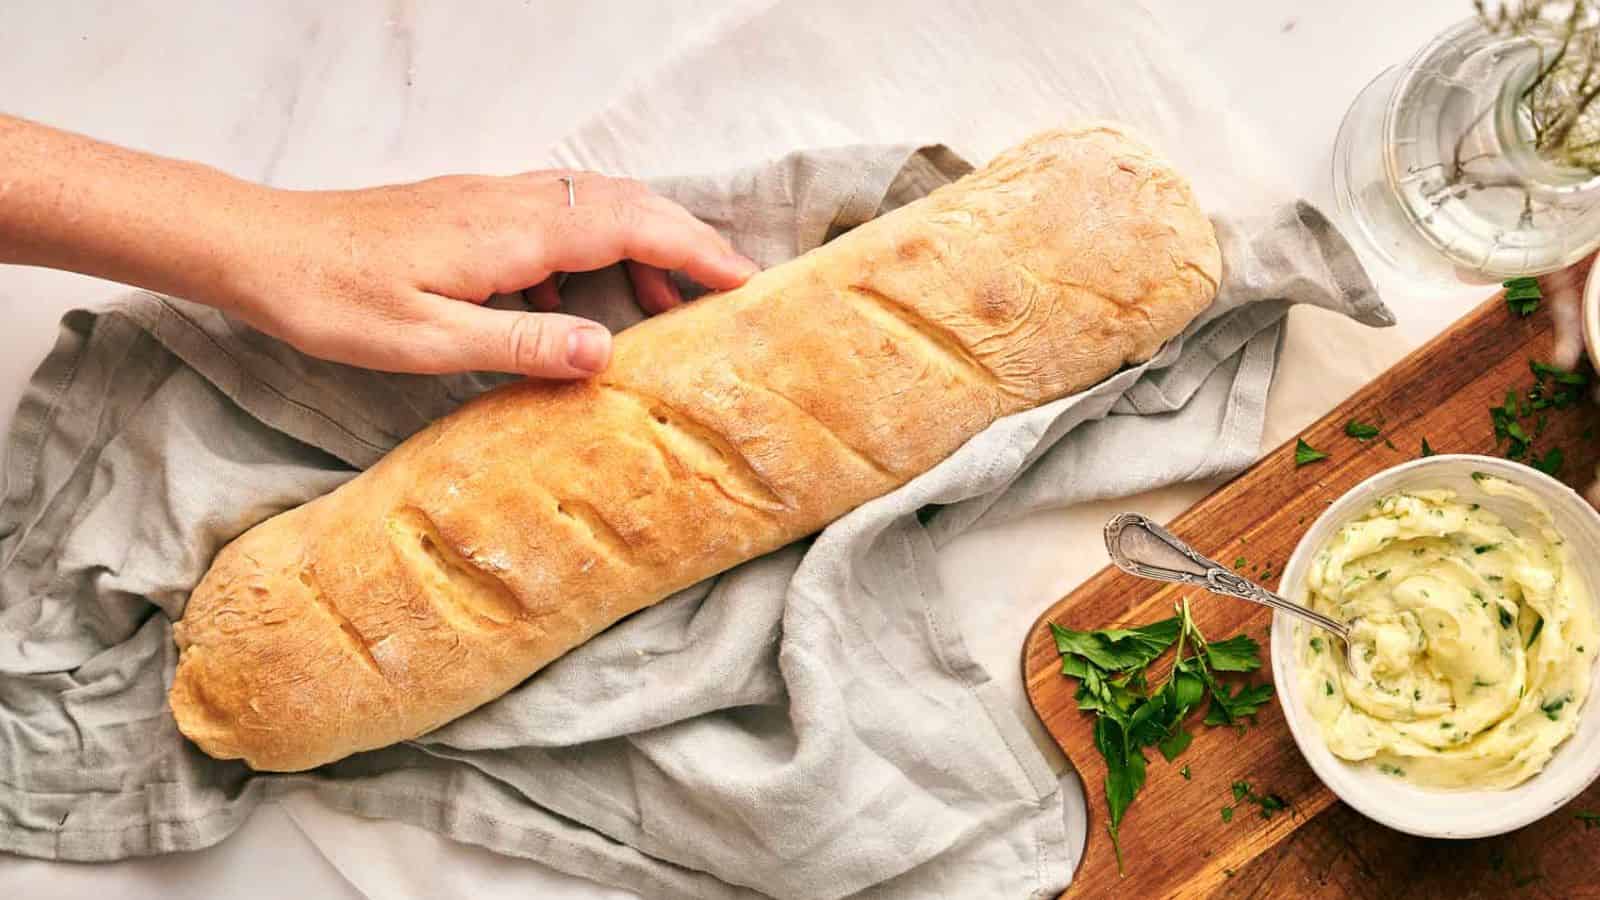 A person is holding French bread.